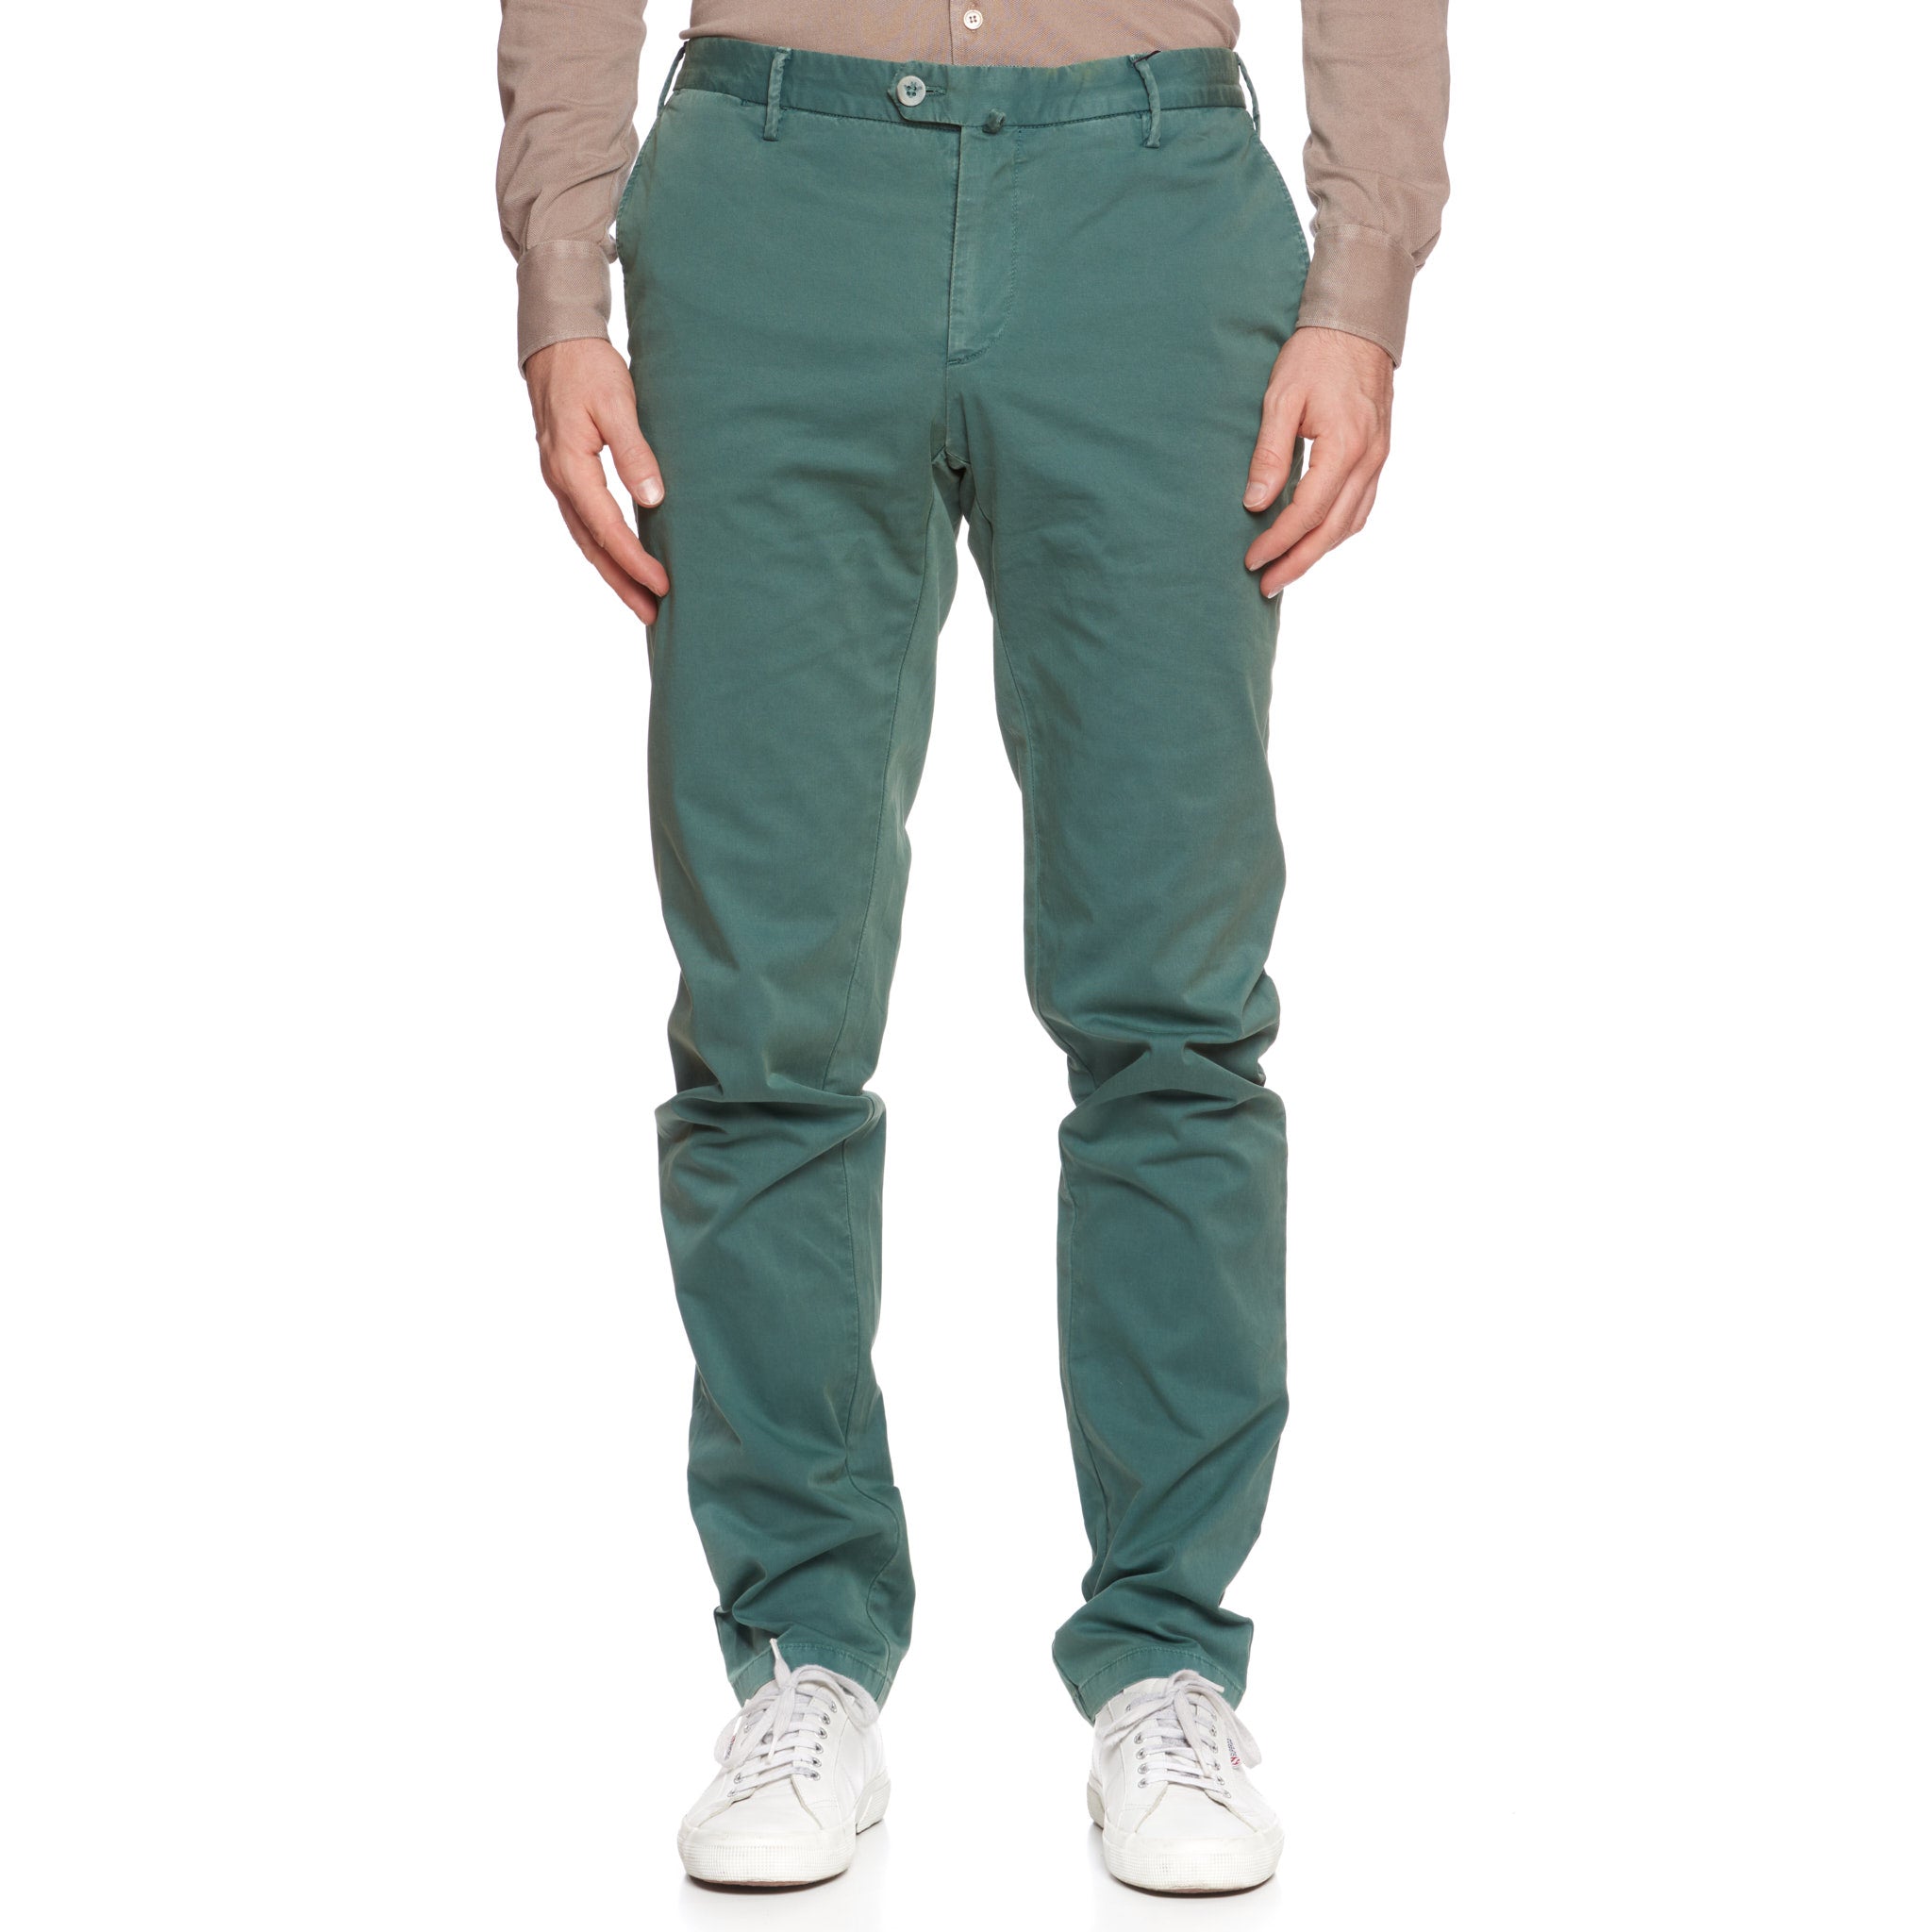 ISAIA Napoli "Tinto Slim" Green Twill Cotton Flat Front Pants NEW Slim Fit ISAIA